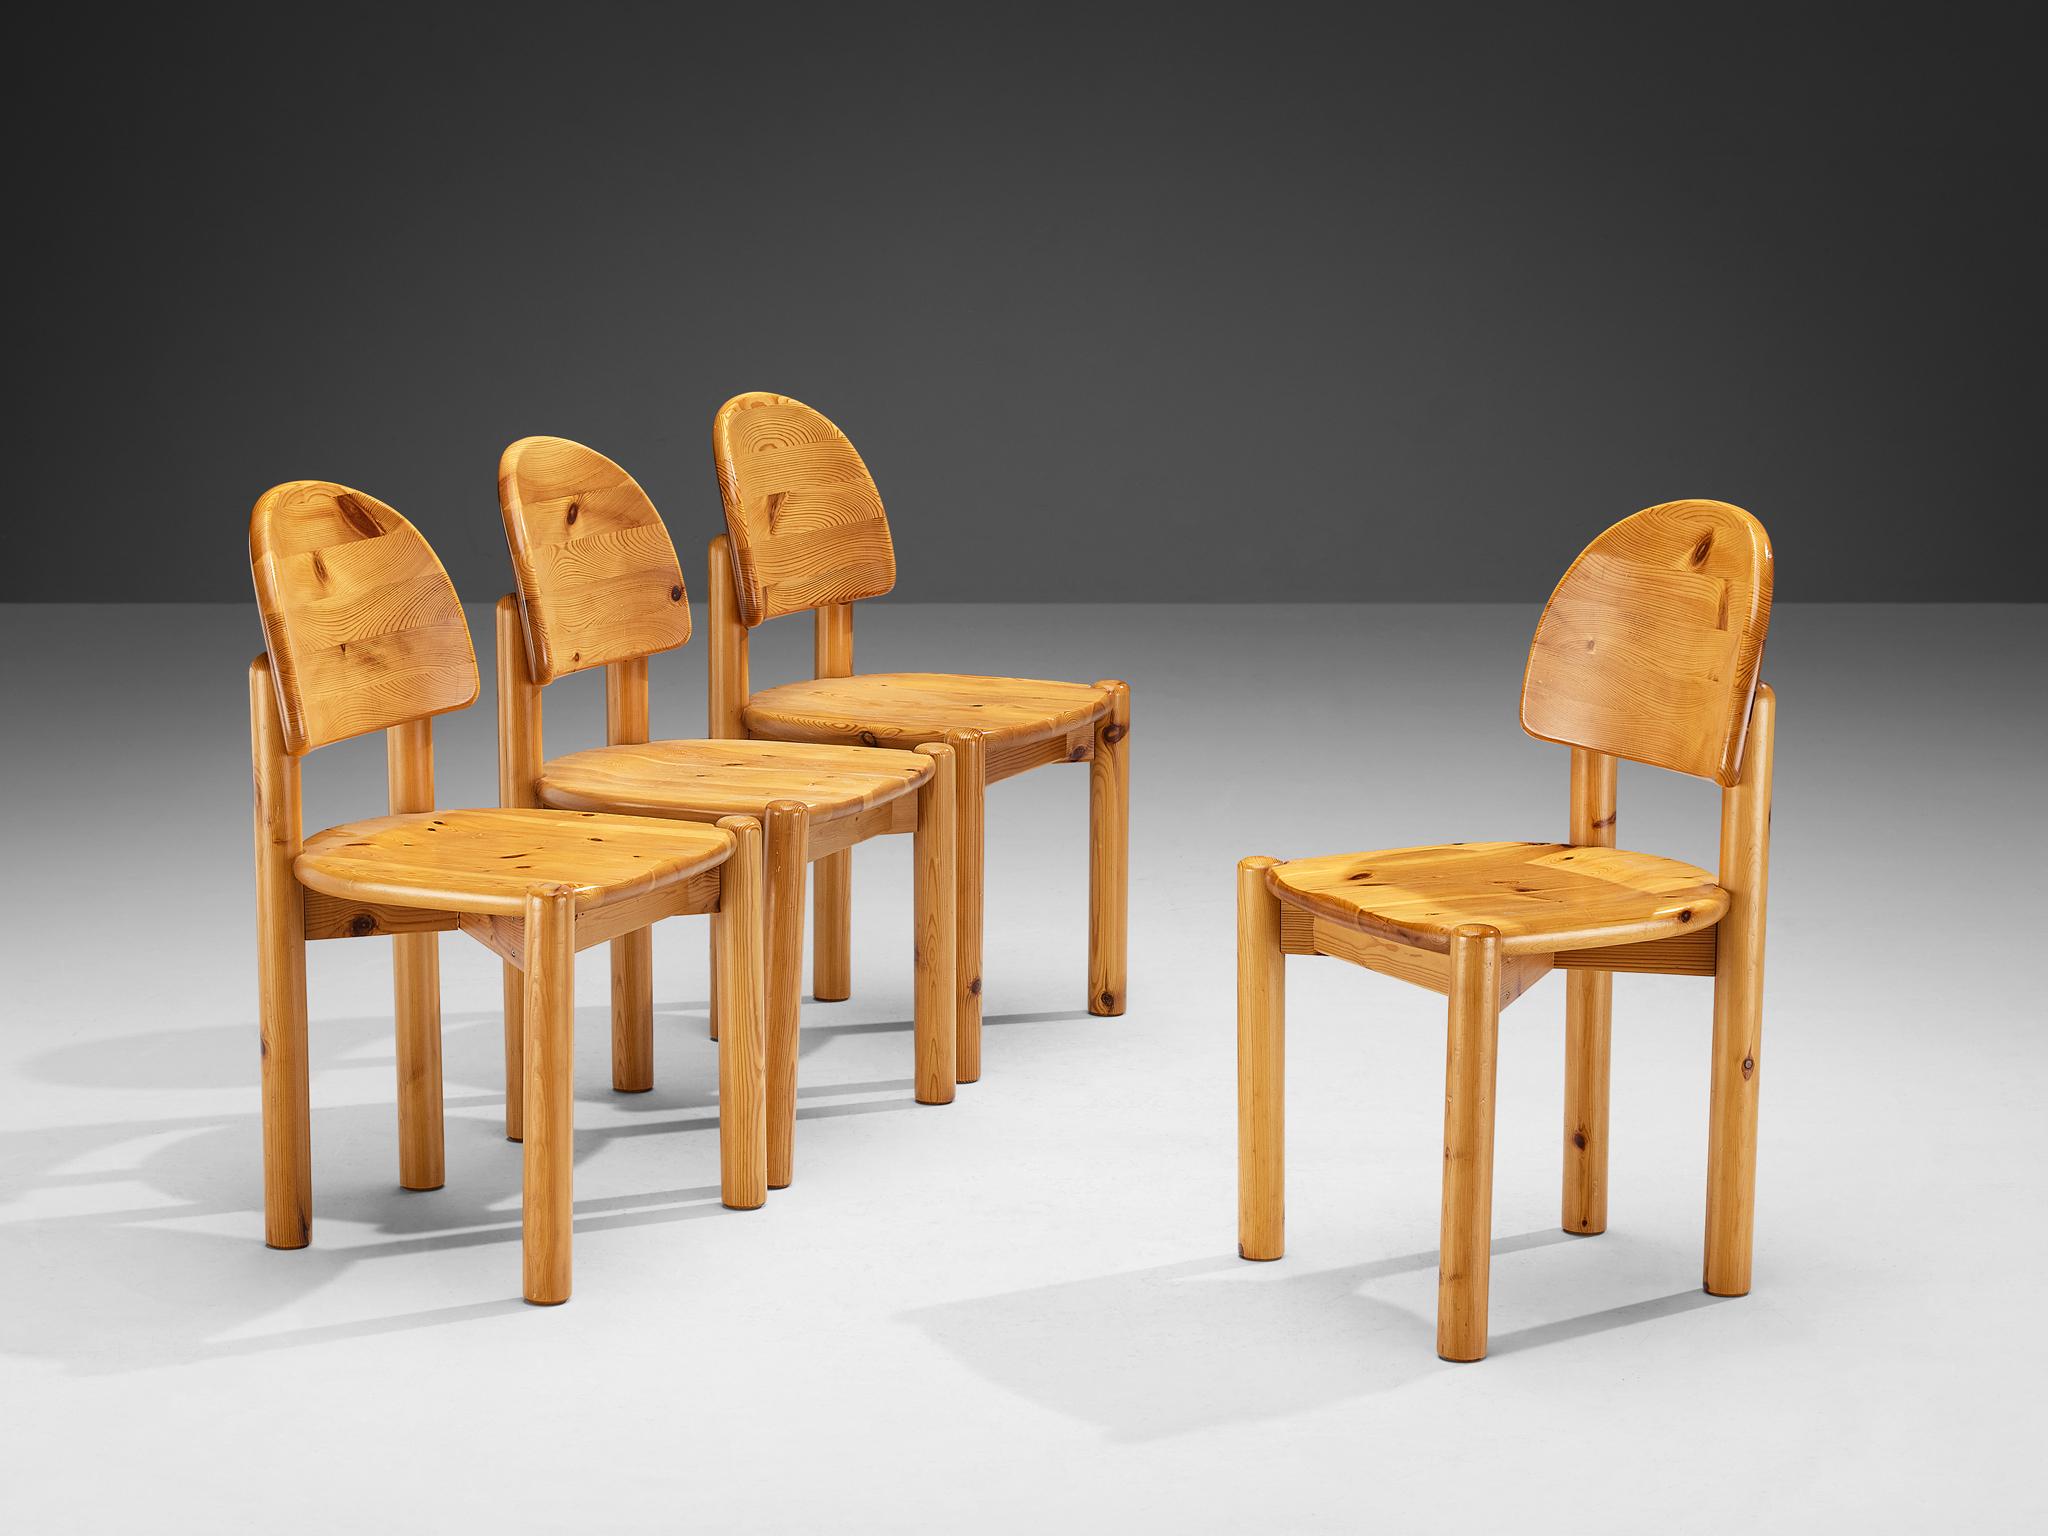 Rainer Daumiller for Hirtshals Sawmill, set of four dining chairs, pine, Denmark, 1970s

Beautiful, organic and natural dining chairs in solid pine by Danish Rainer Daumiller in the 1970s. A simplistic design with a round seating and attention for